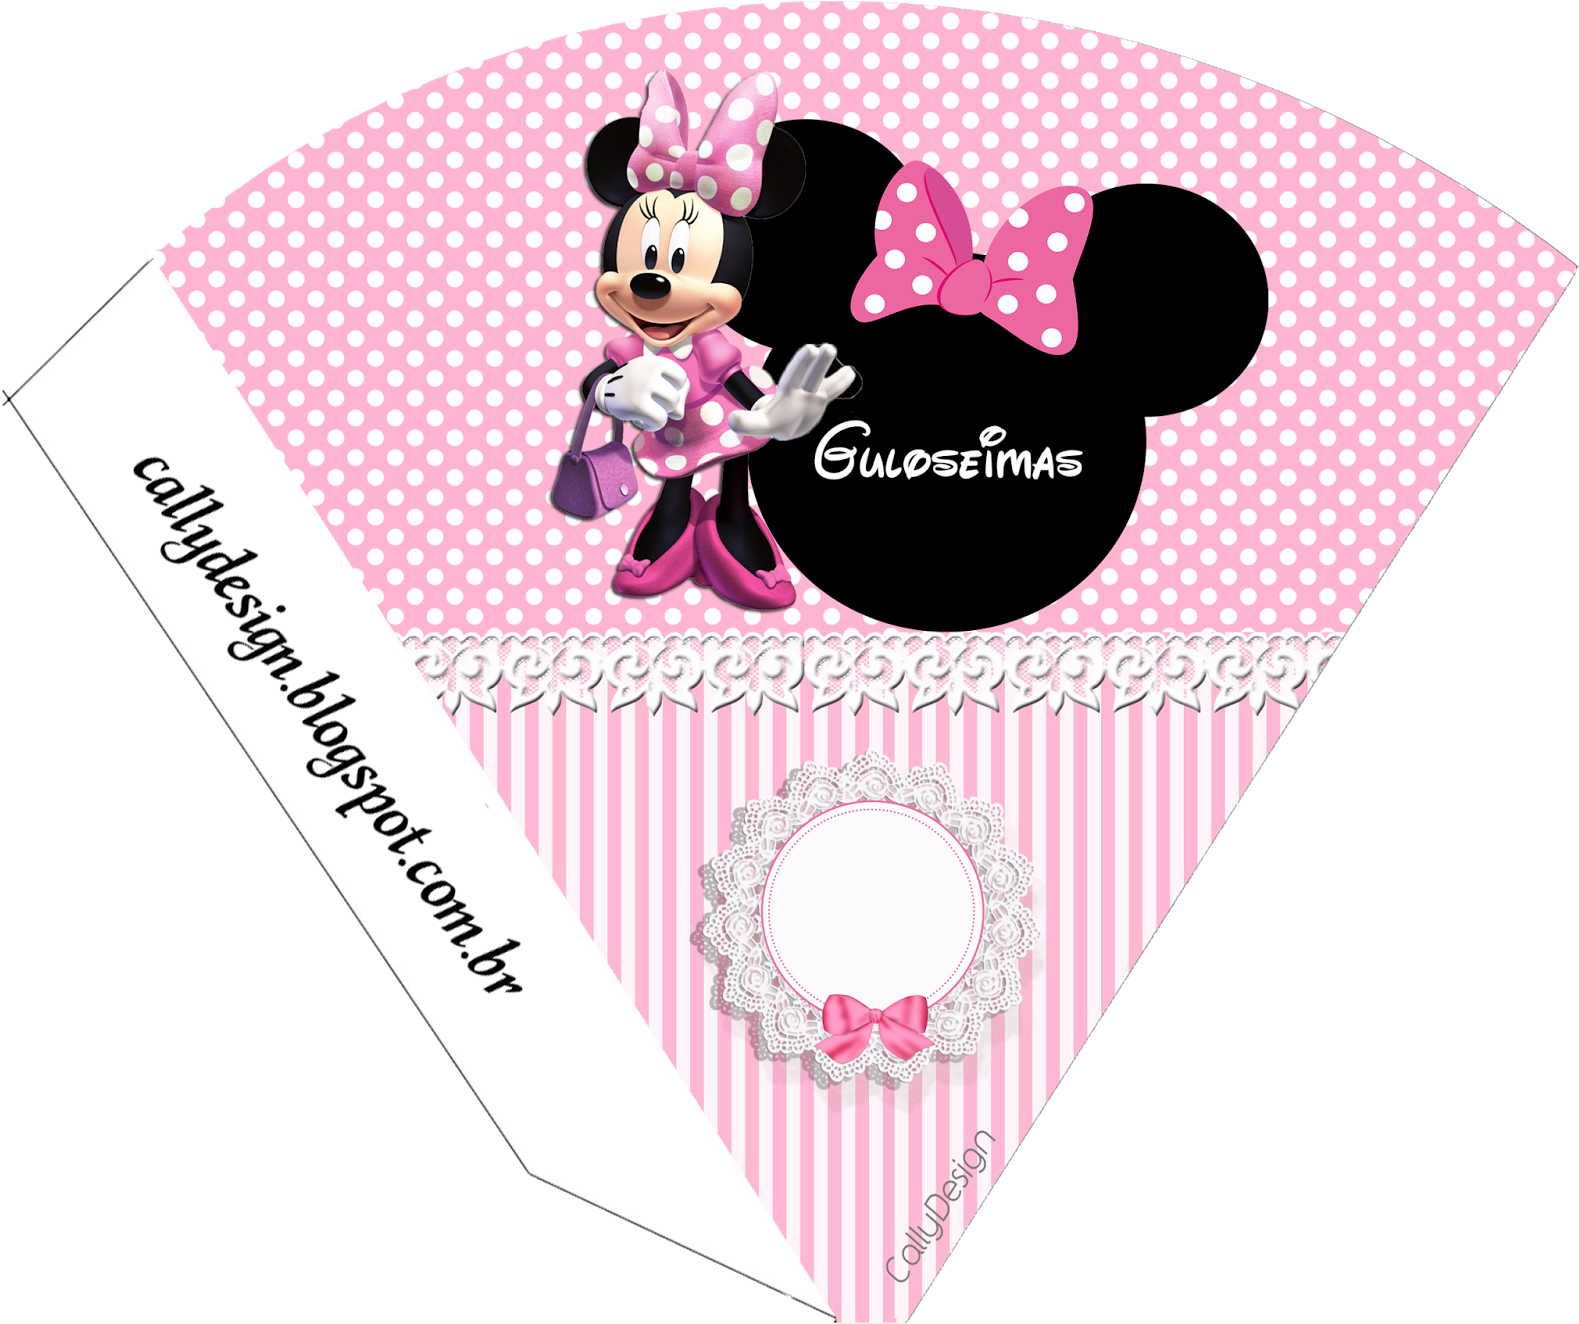 Minnie Rosa Party Cone Design PNG image